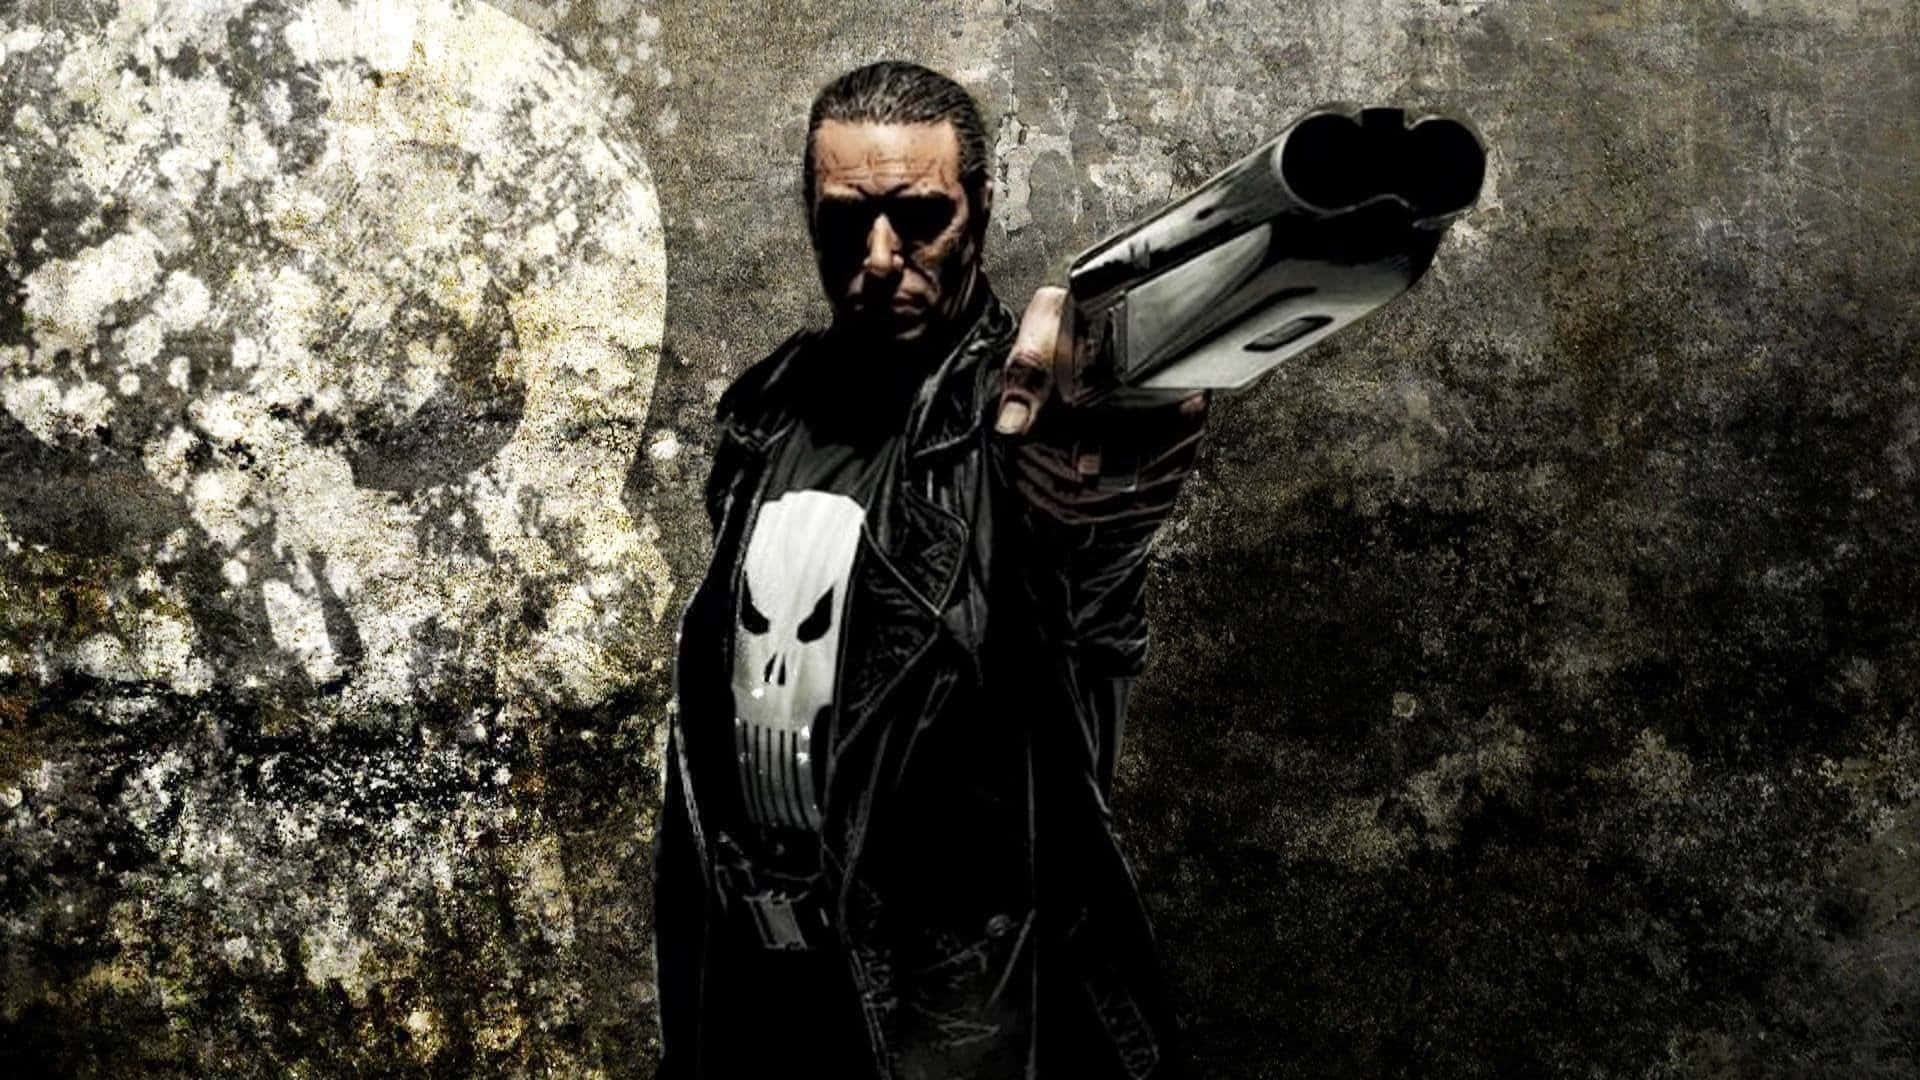 Show Your Support With The Punisher Desktop Wallpaper Wallpaper